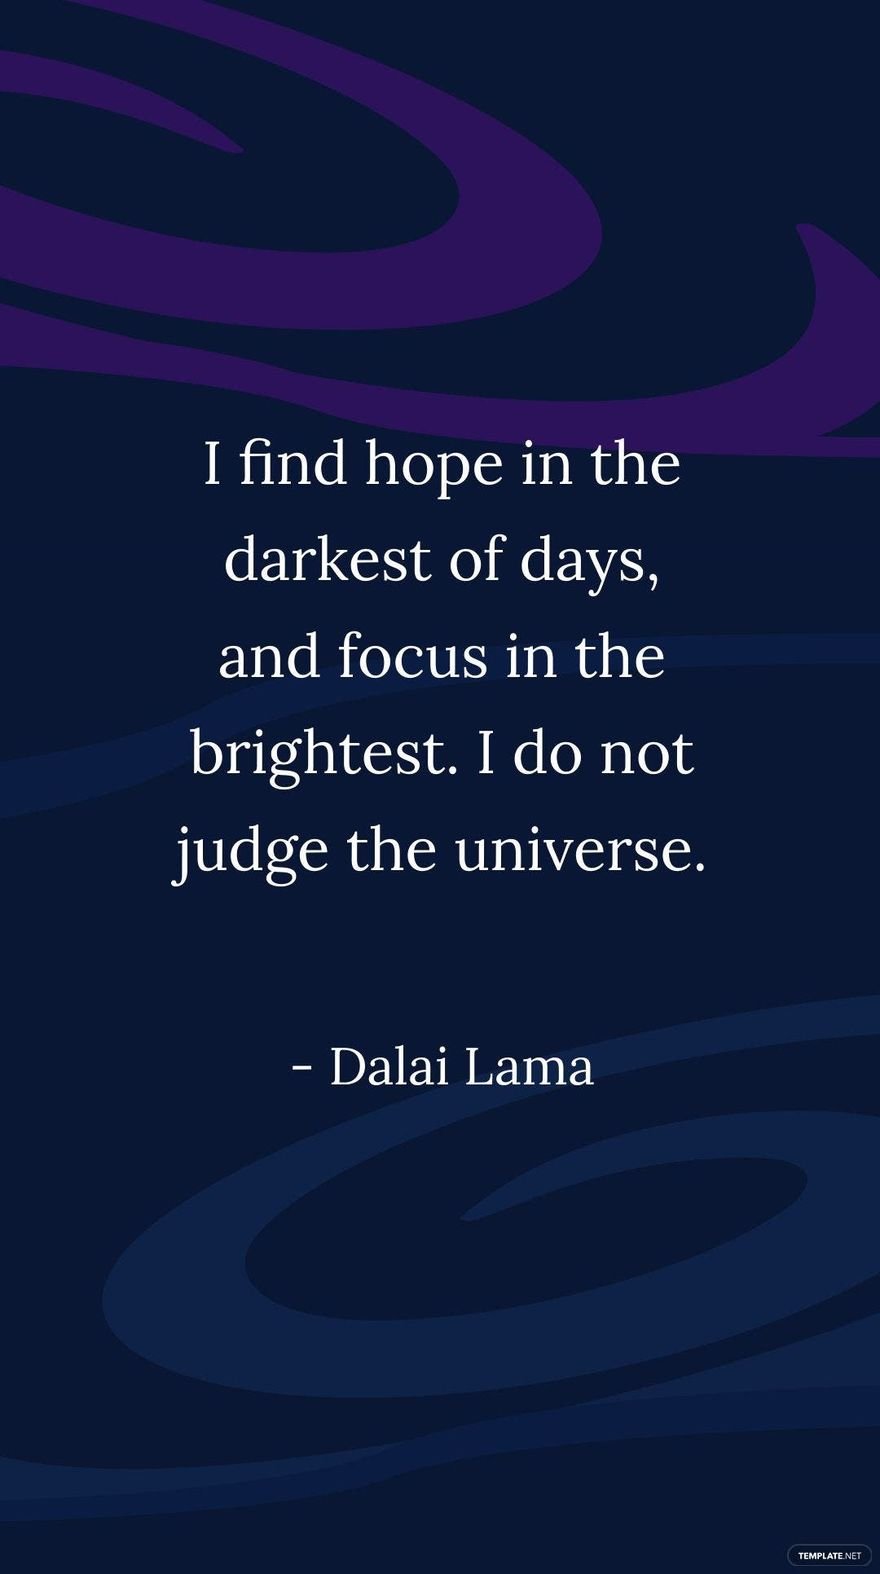 Free Dalai Lama - I find hope in the darkest of days, and focus in the brightest. I do not judge the universe. in JPG